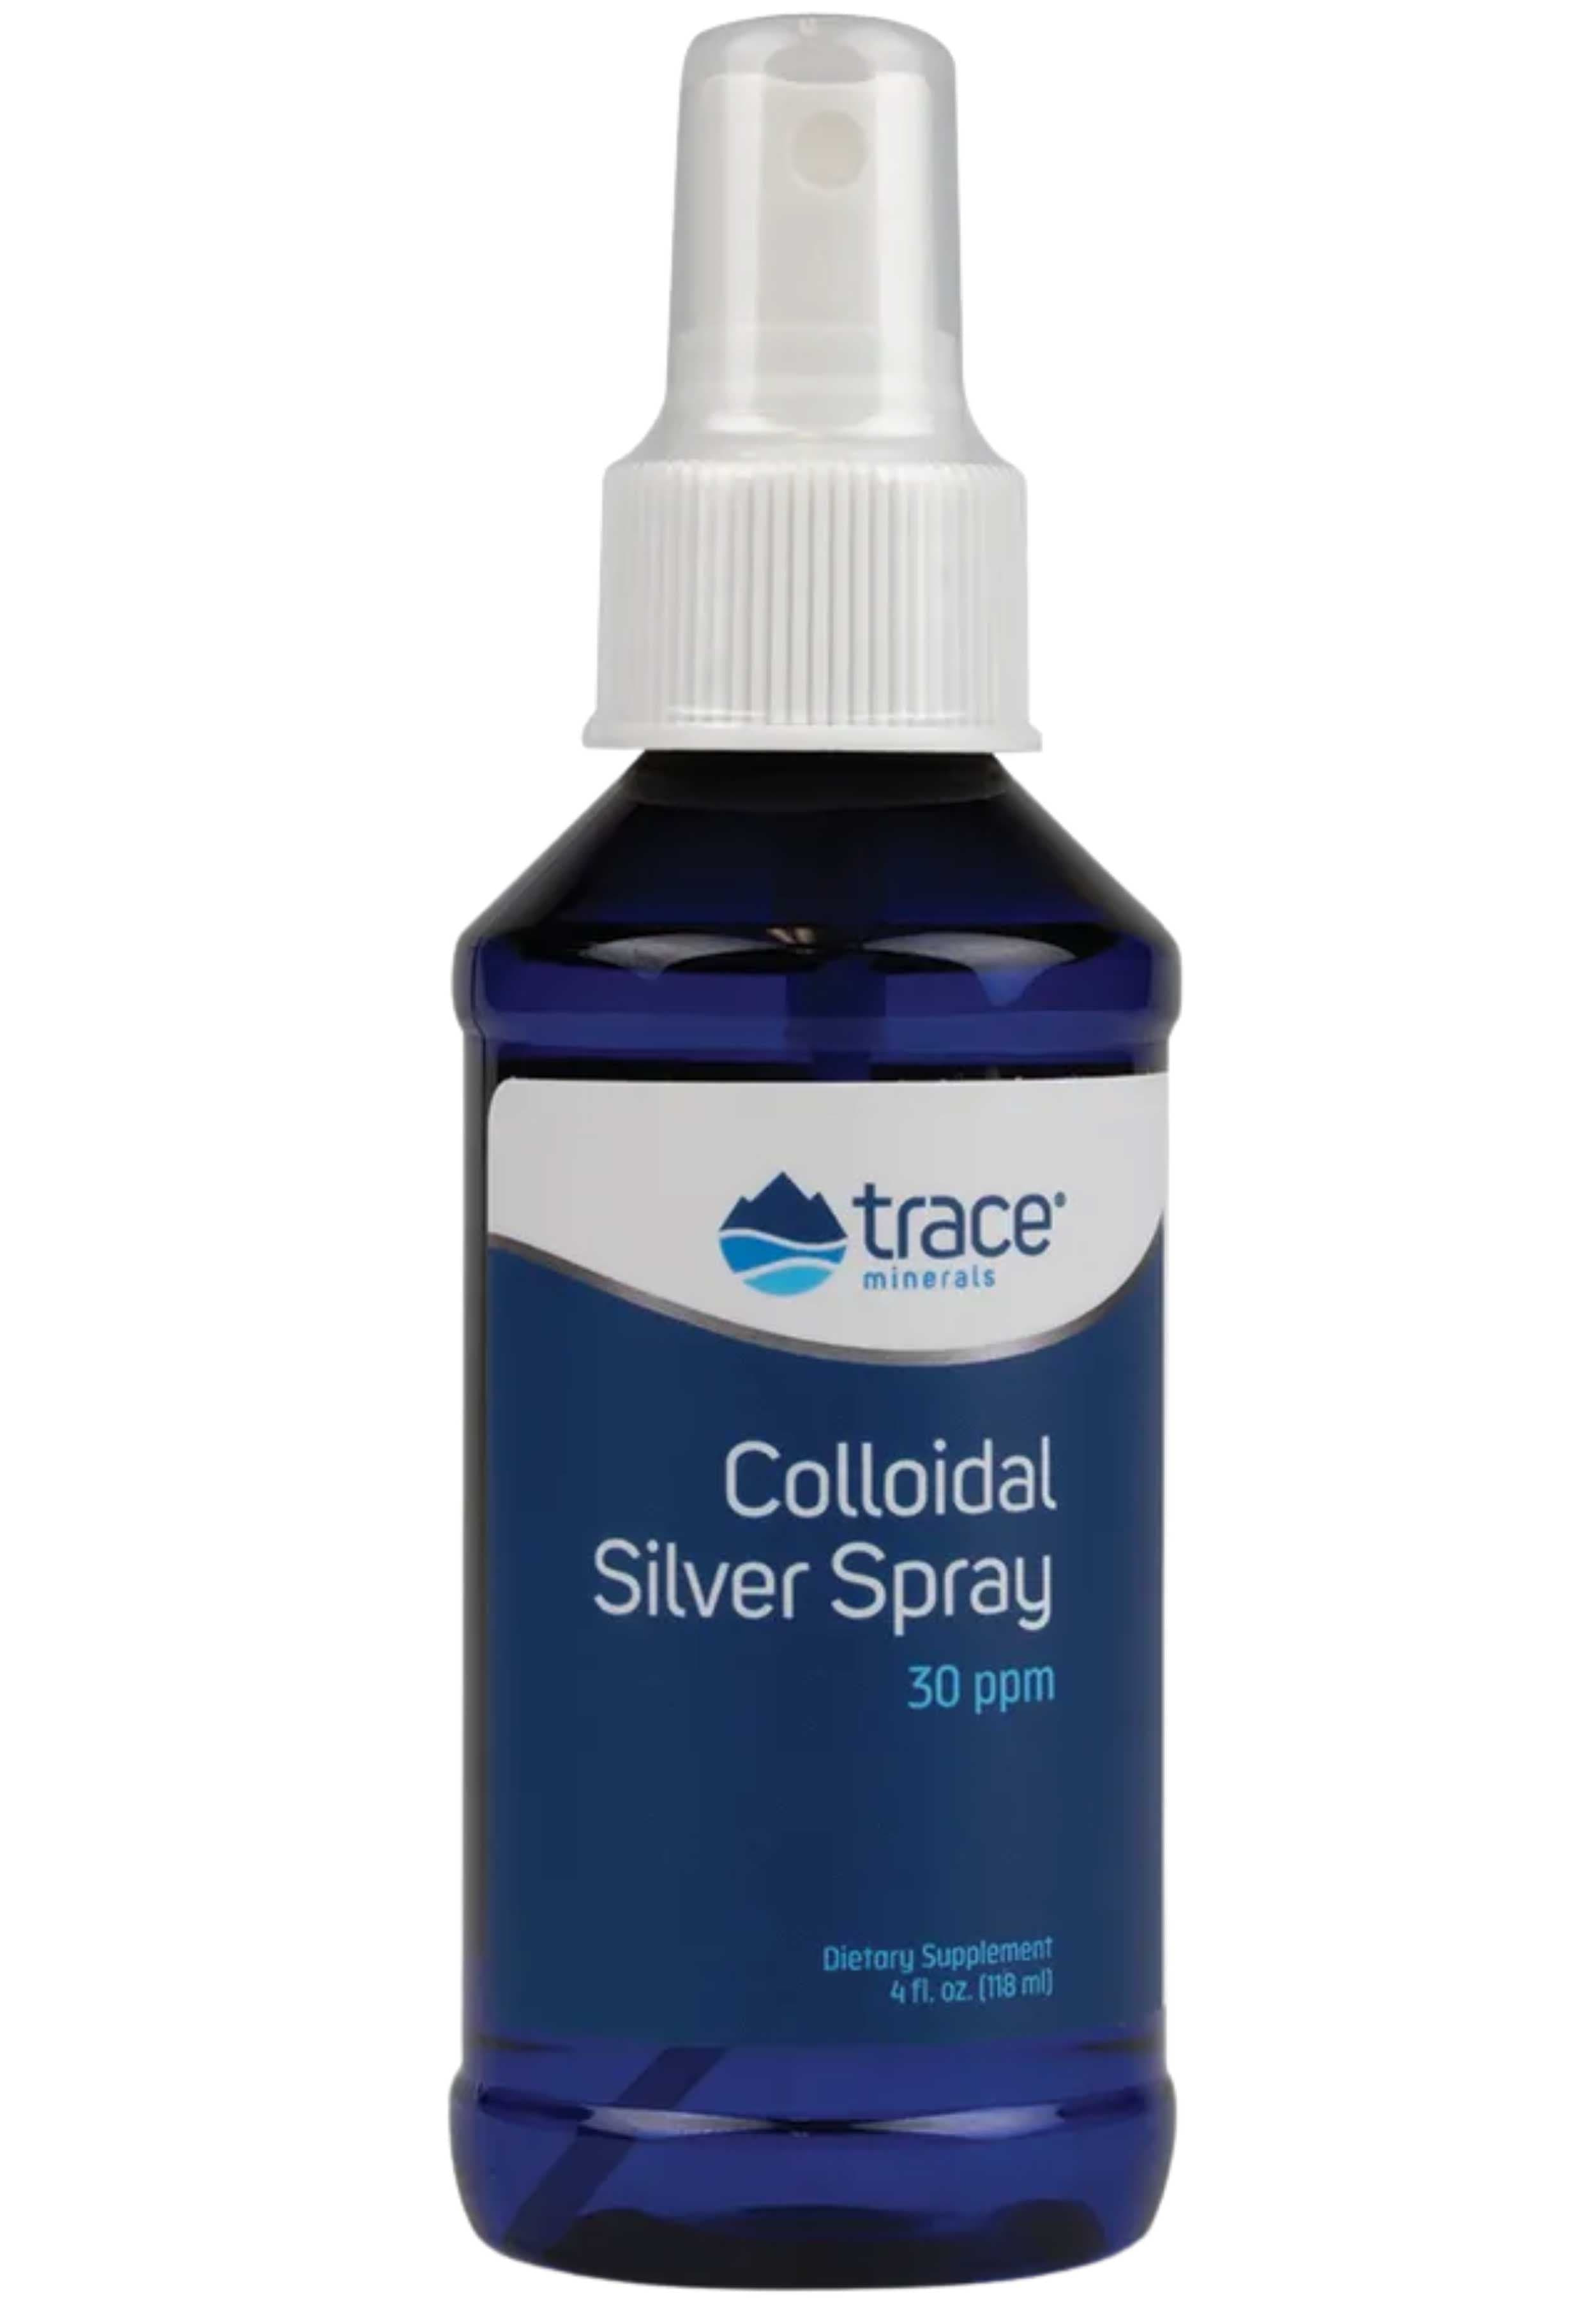 Trace Minerals Research Colloidal Silver Spray 30 ppm